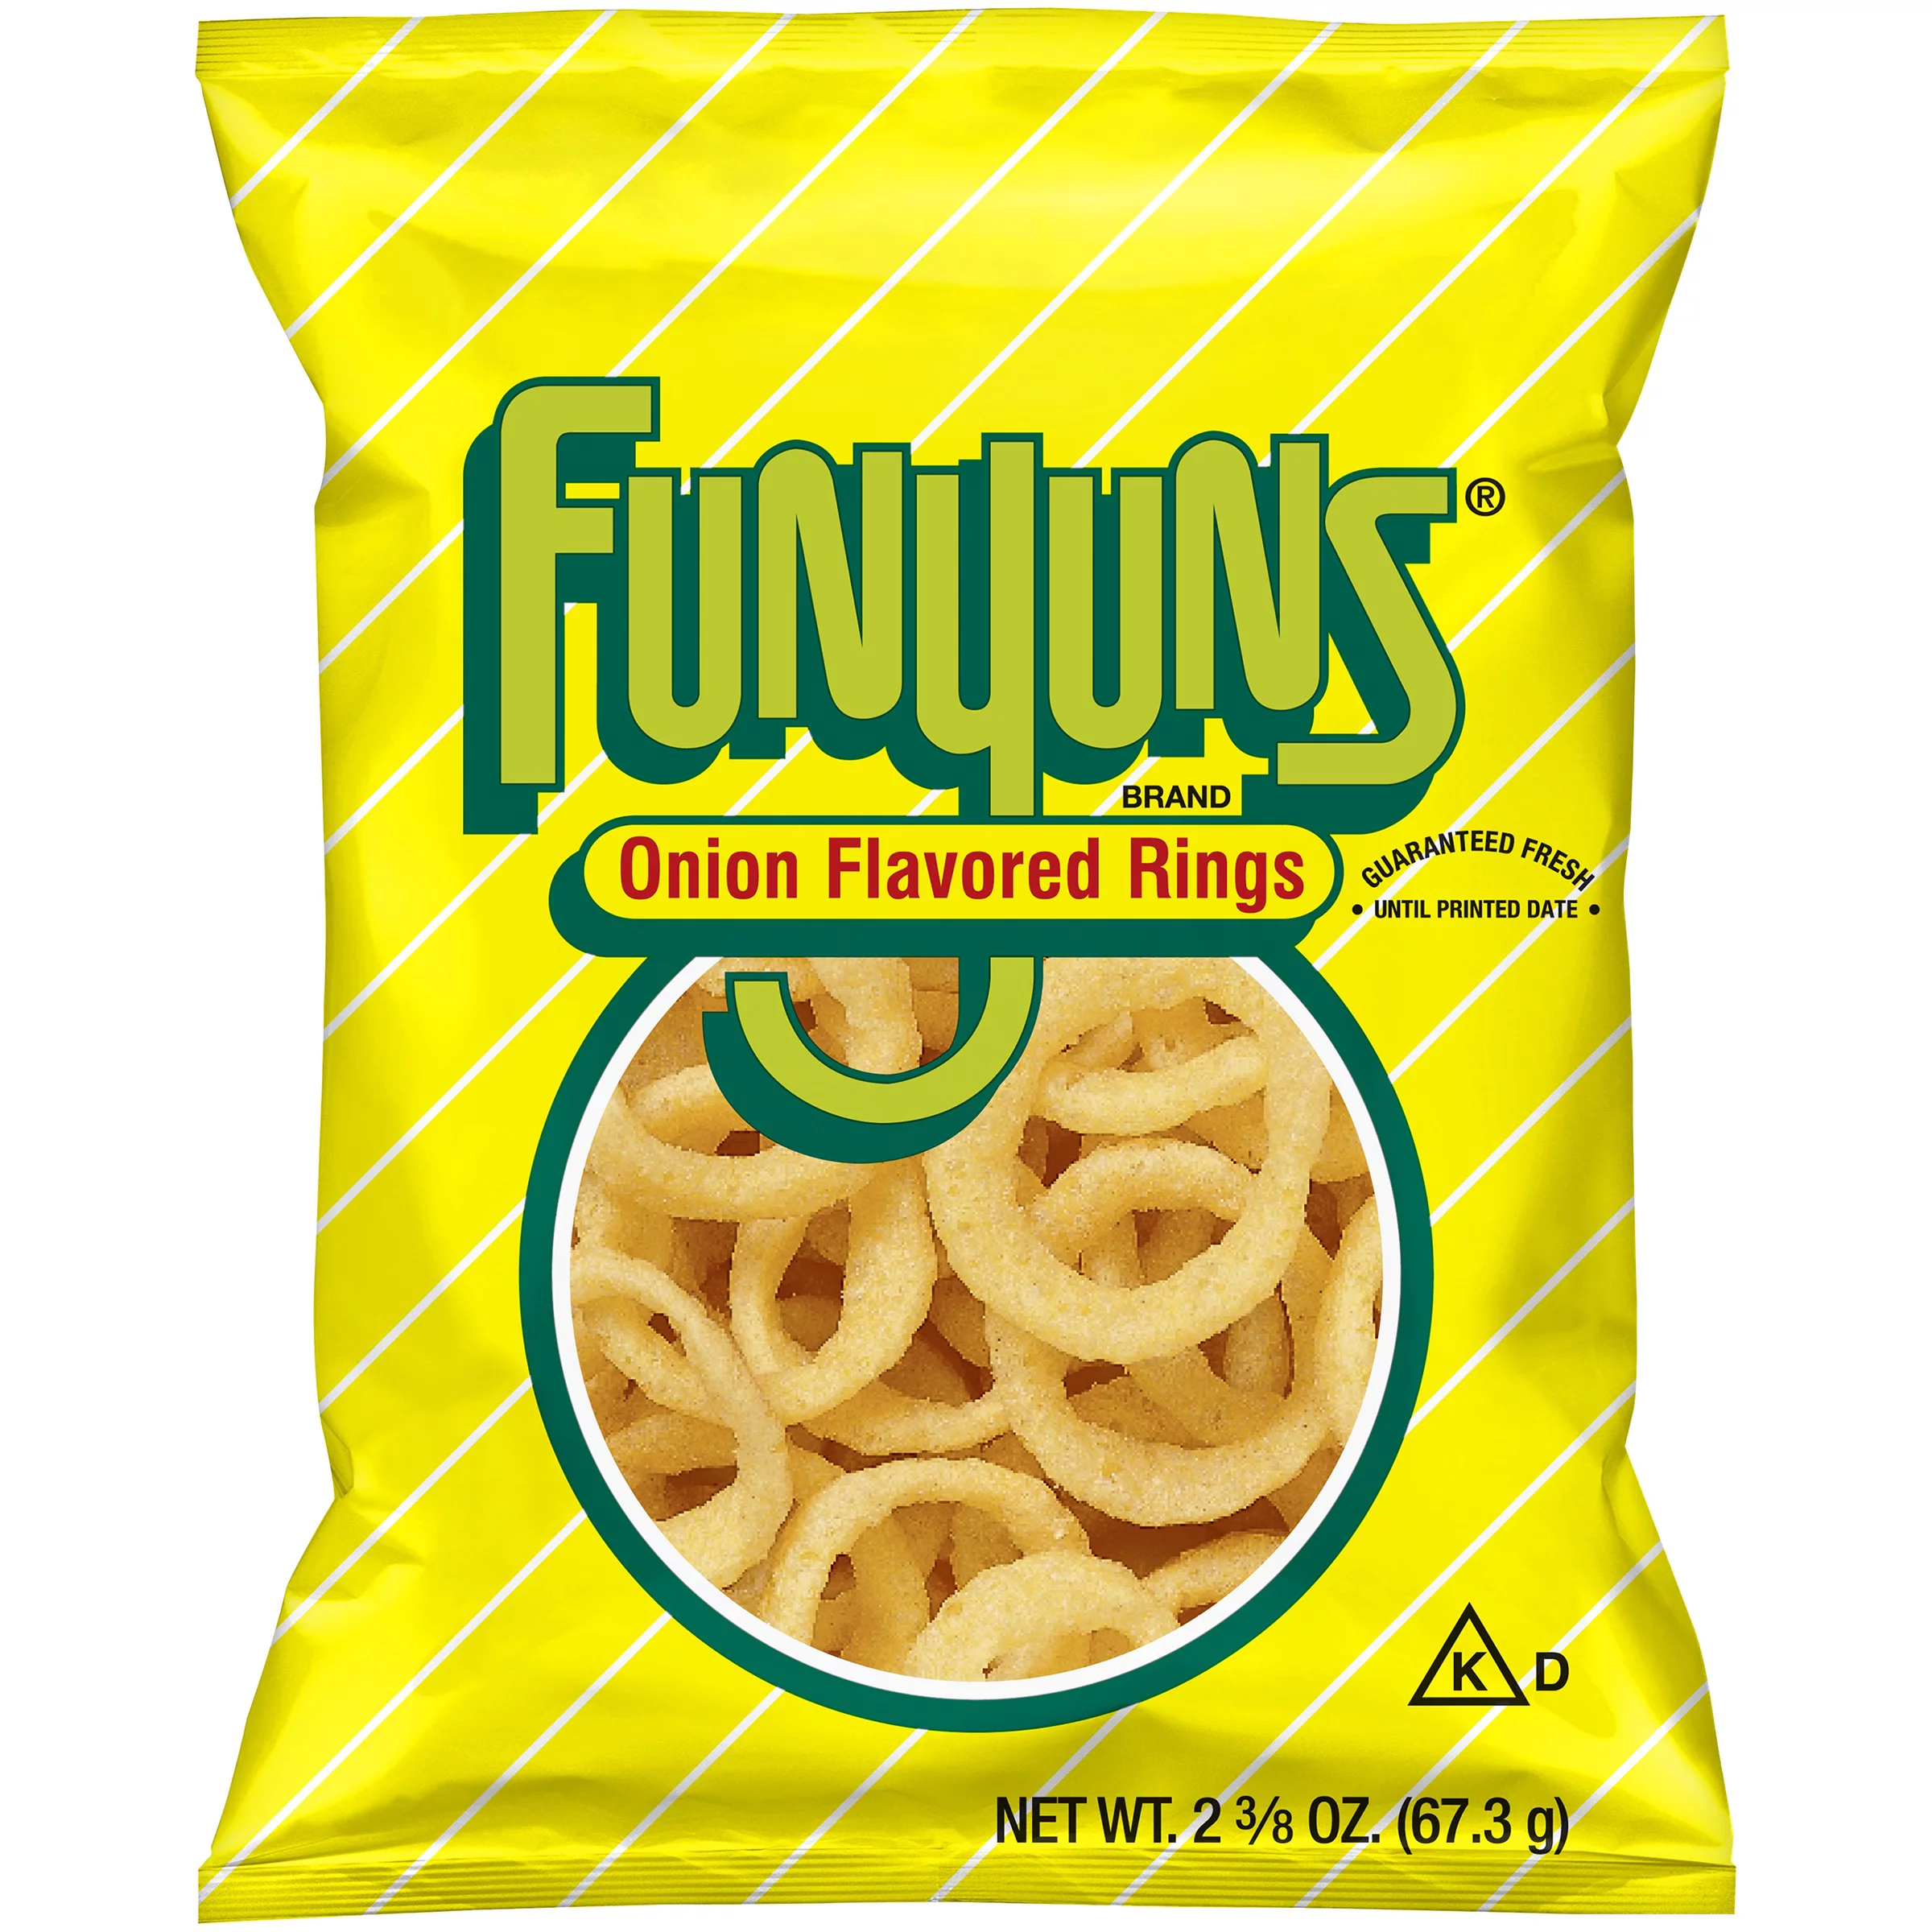 how are funyuns made